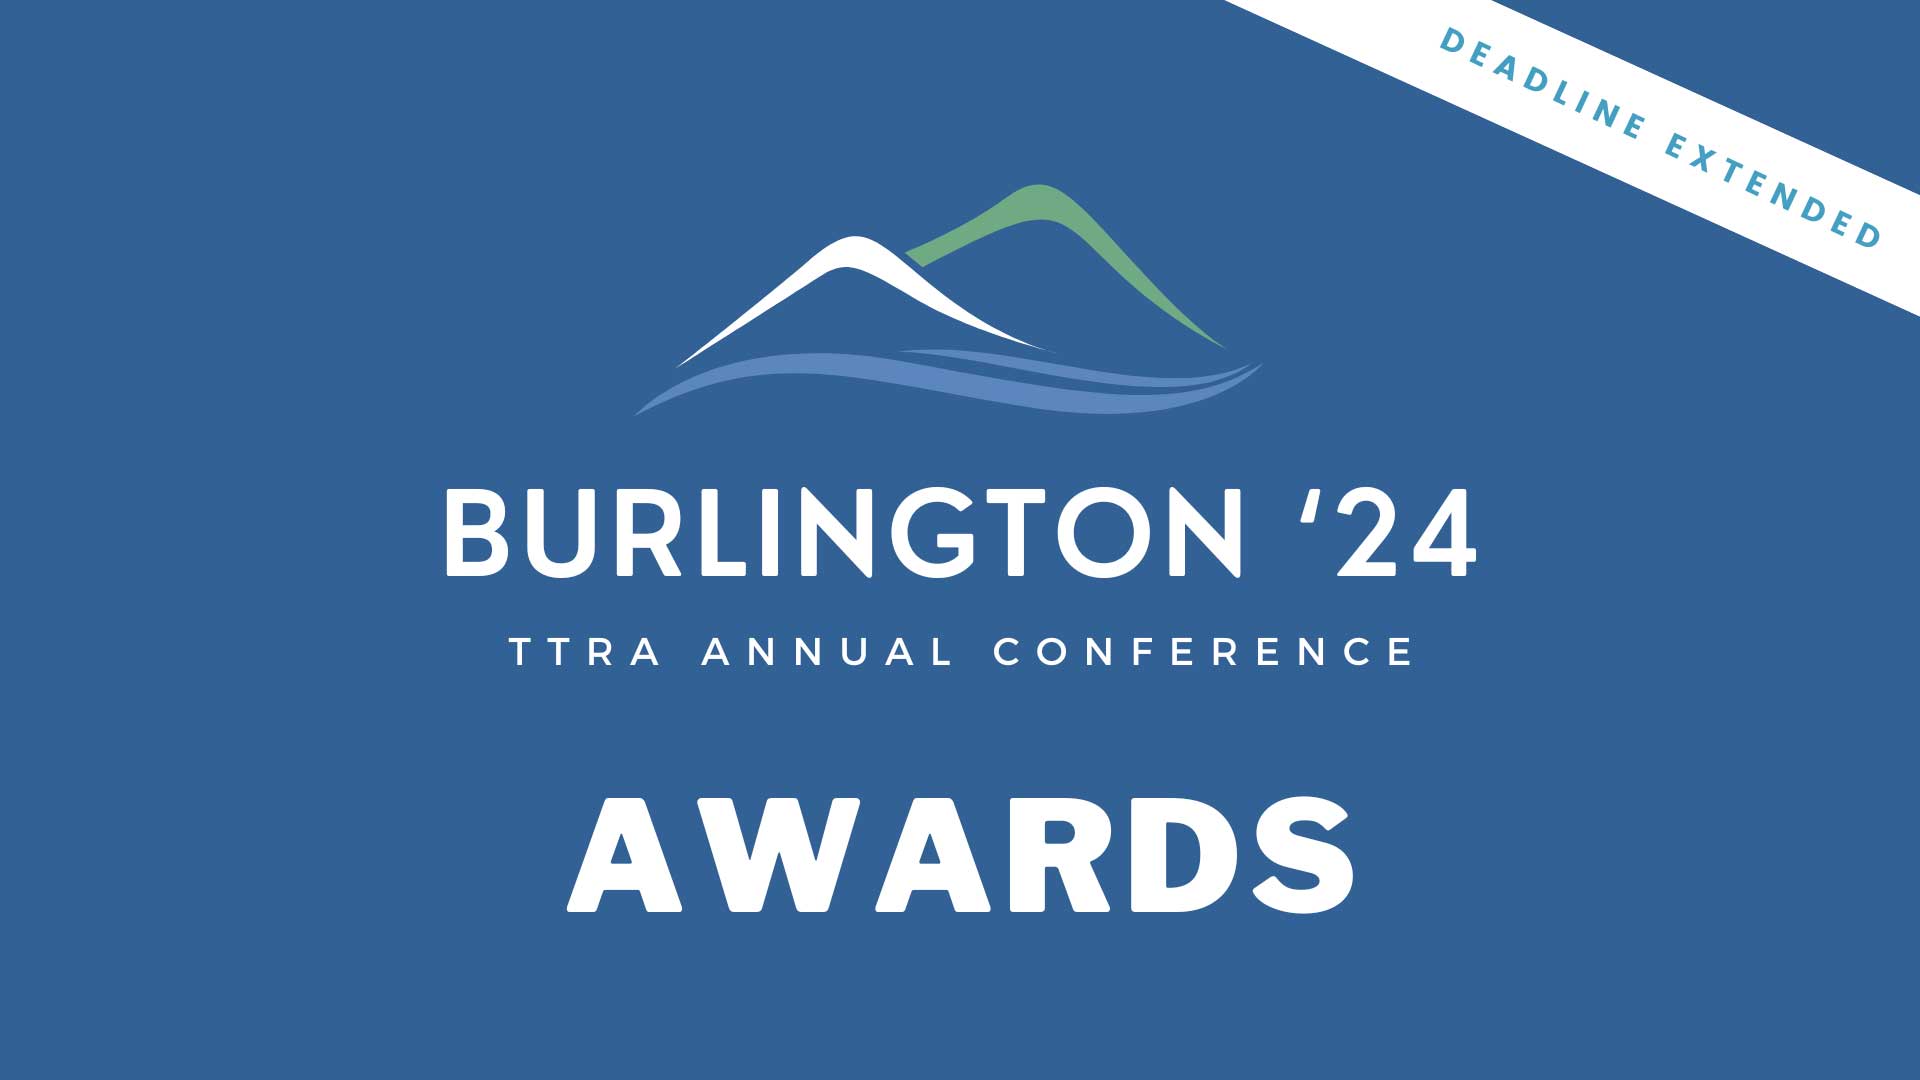 TTRA Awards deadline extended to March 20